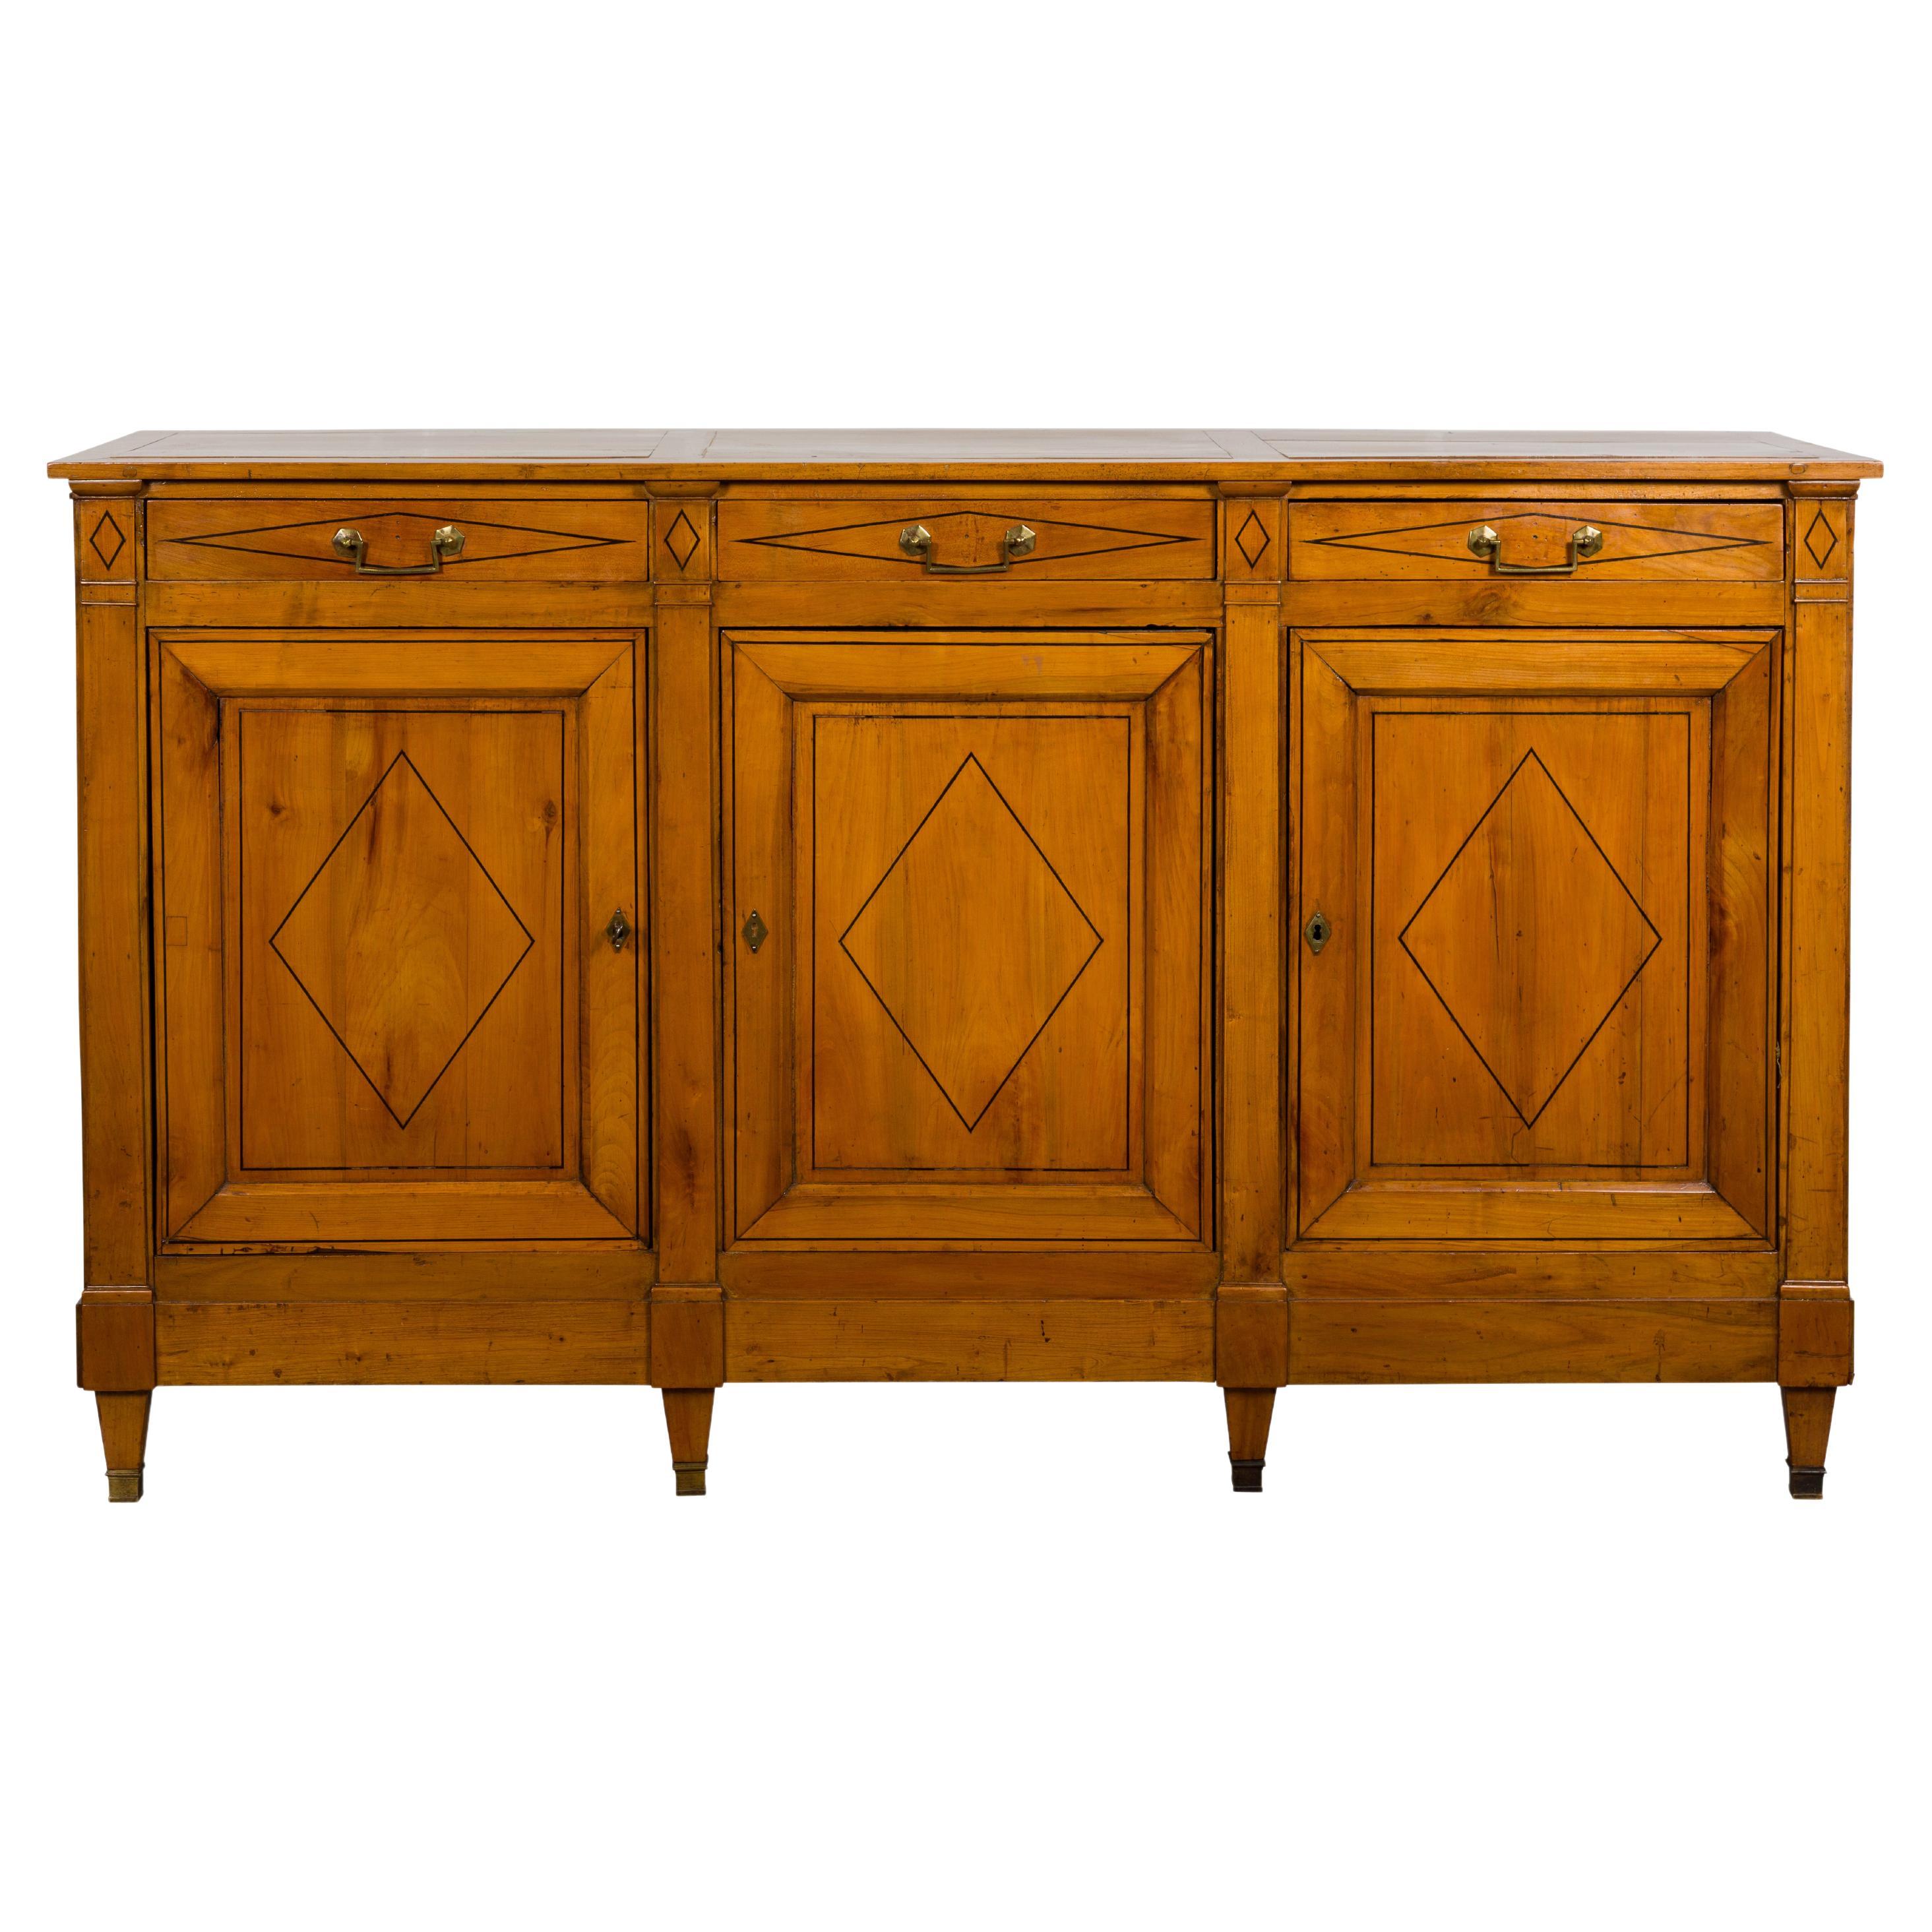 French 19th Century Walnut Enfilade with Three Drawers and Doors, Diamond Motifs For Sale